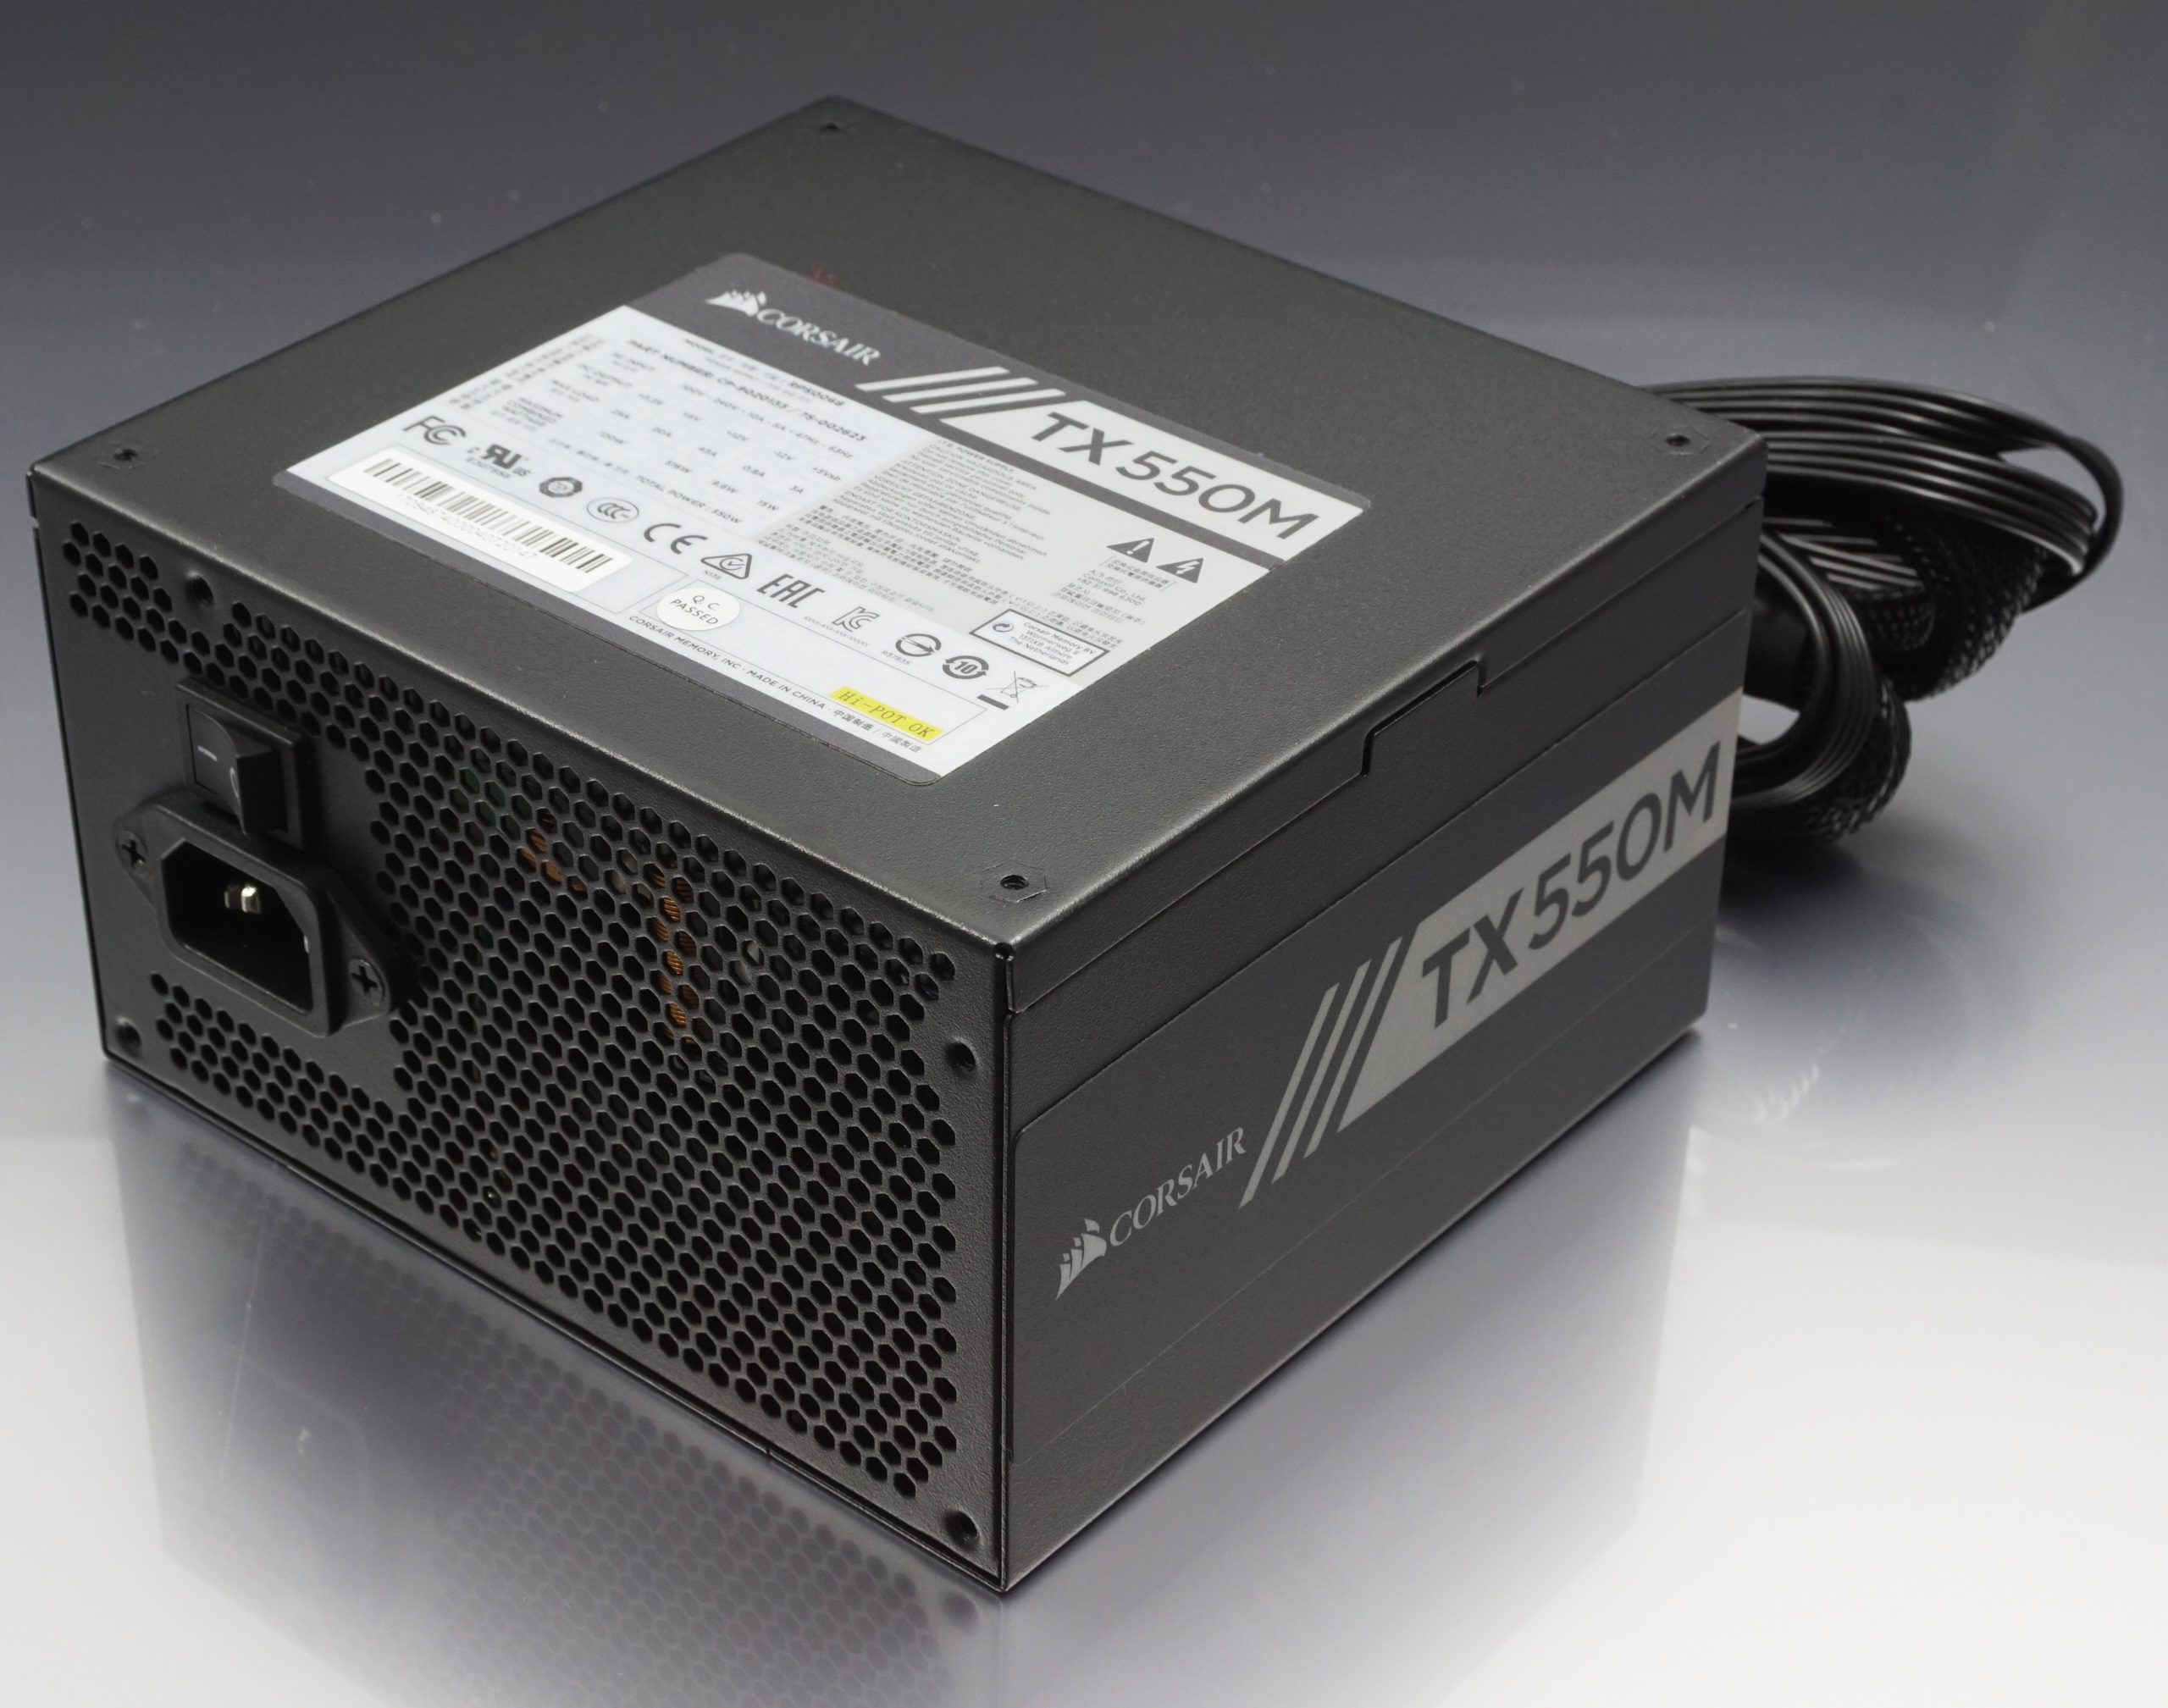 Corsair TX550M PSU The $80 Power Supply for Almost Everyone: The Corsair 80Plus Gold PSU Review